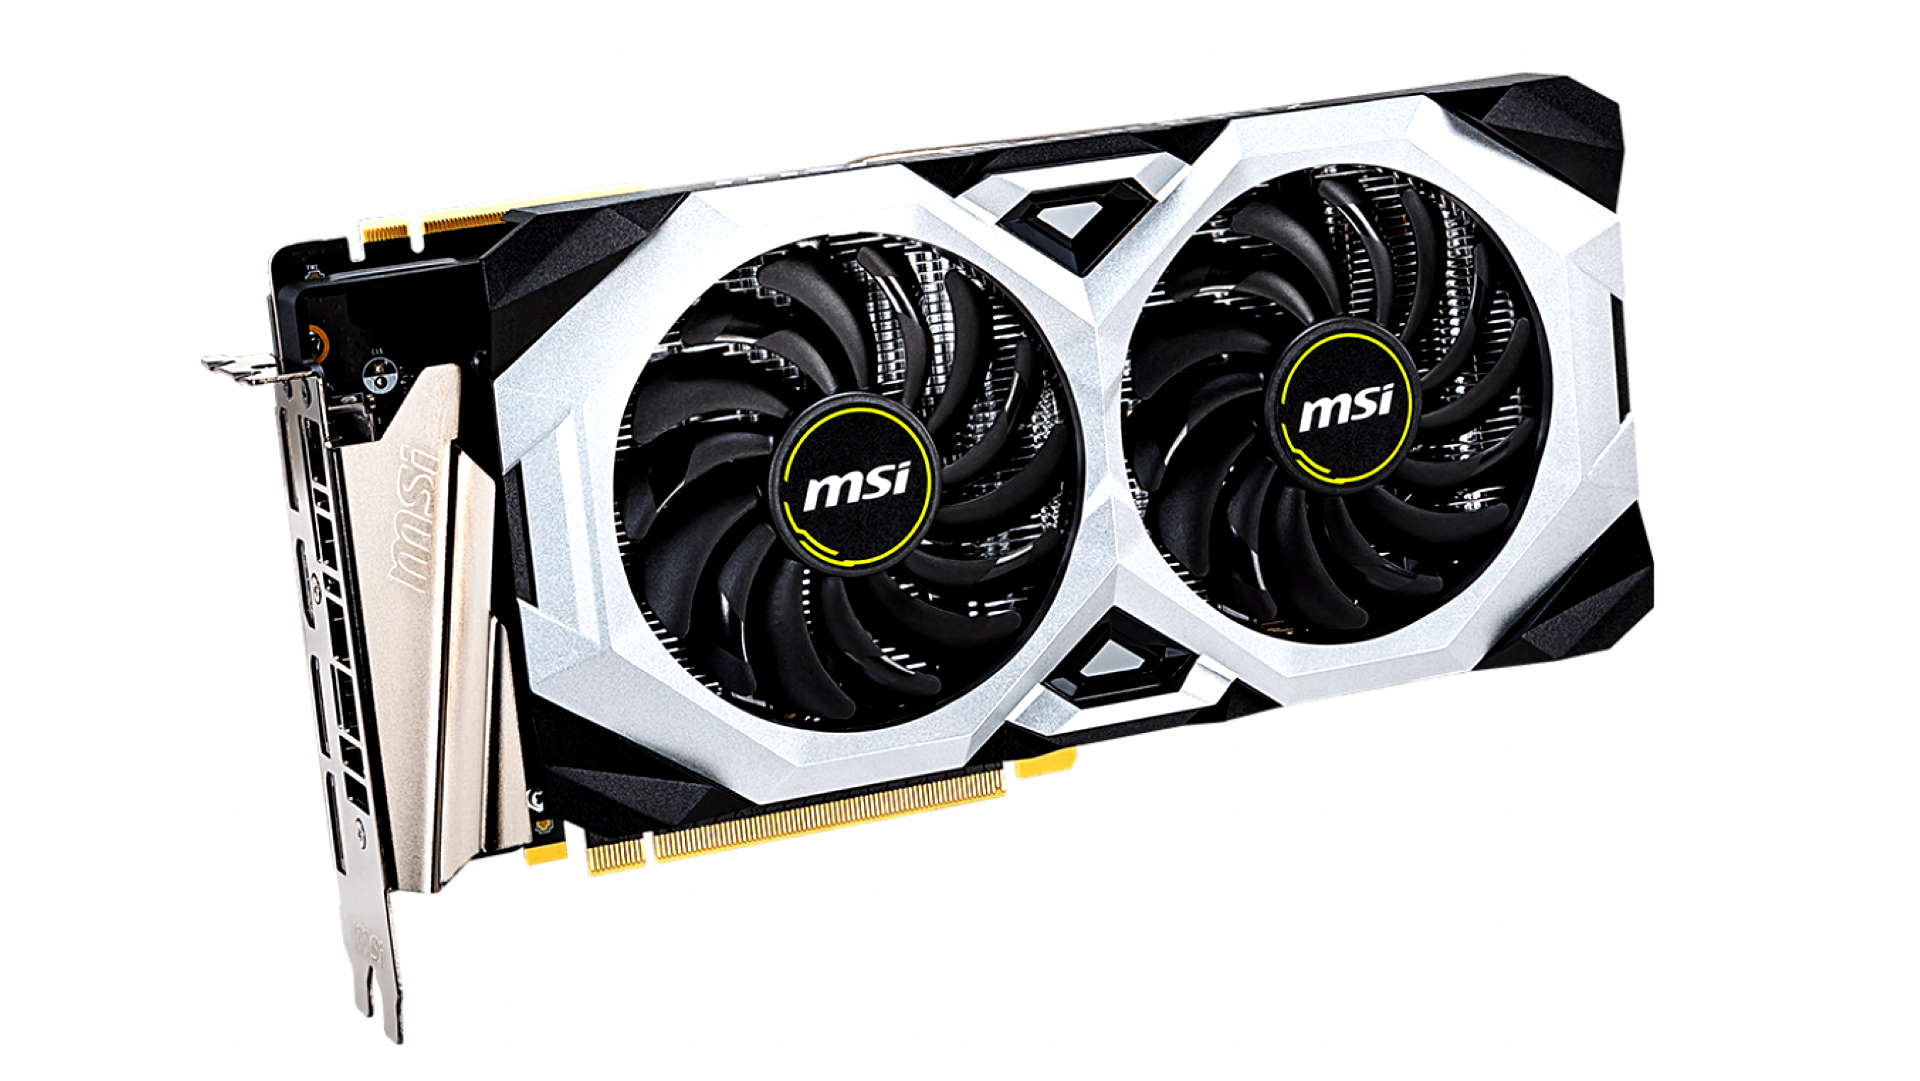 MSI RTX 2070 Super Ventus review – why pay more?